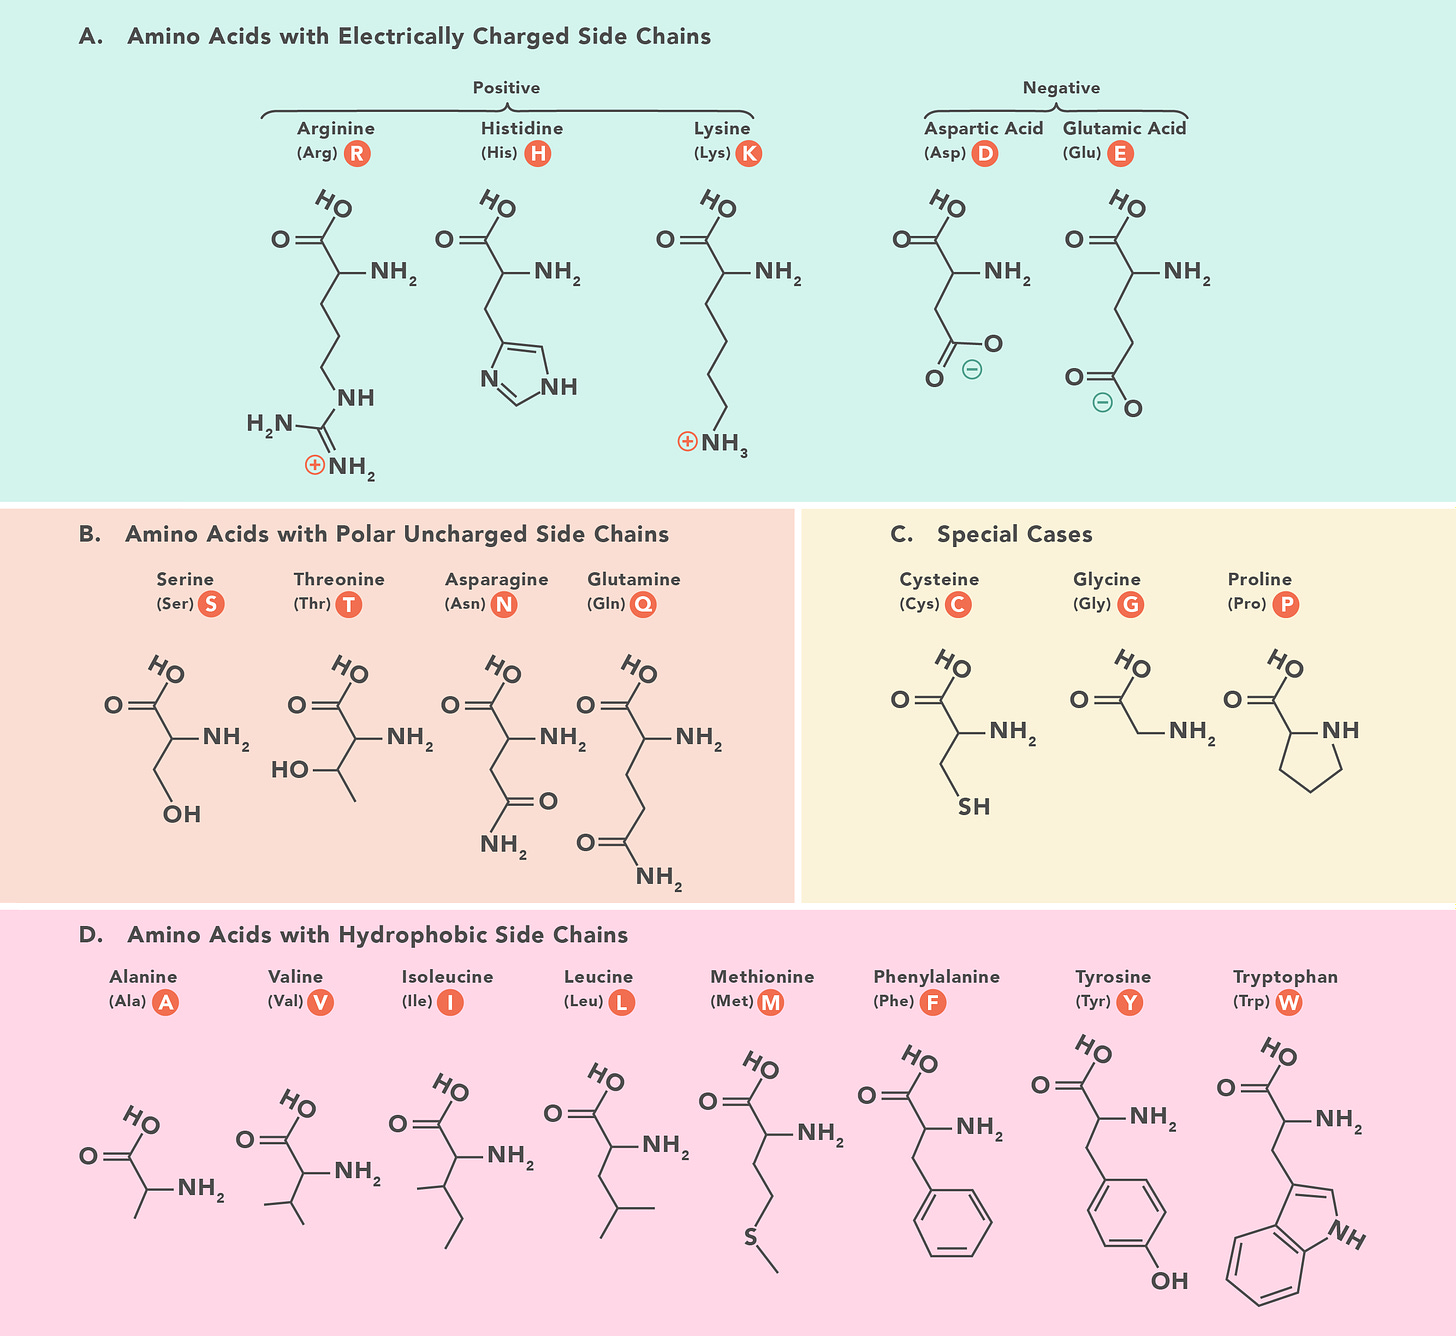 The chemical structures of the 20 amino acids that make up proteins